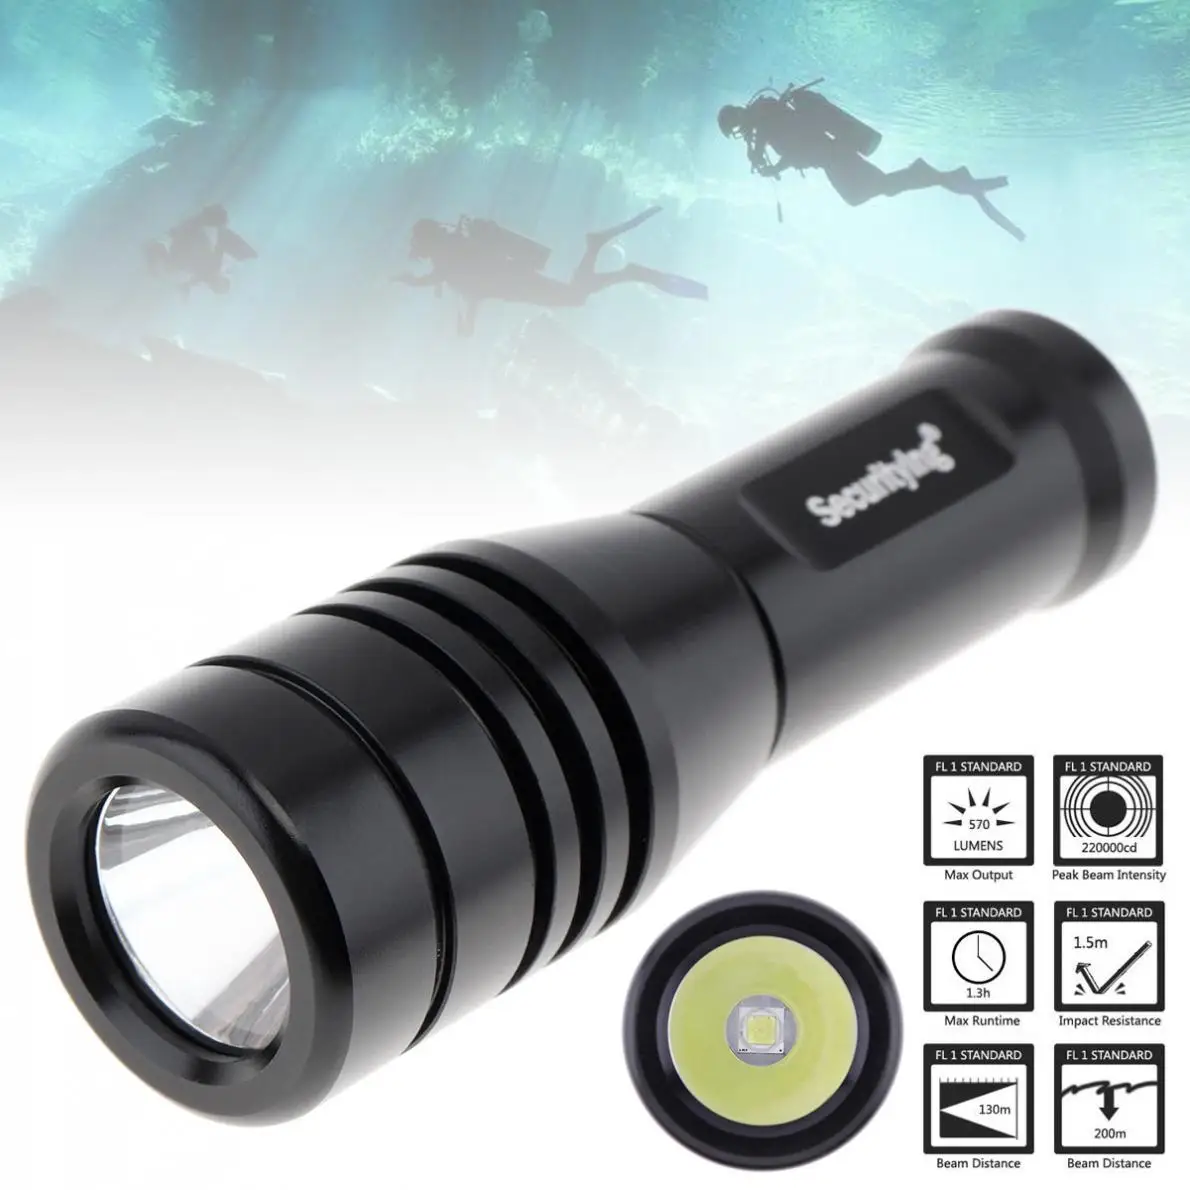 

SecurityIng 570Lm XM-L2 LED IP68 Underwater 150M Scuba Diving Photography Flashlight for Diving/Cave Exploration/Flood Control